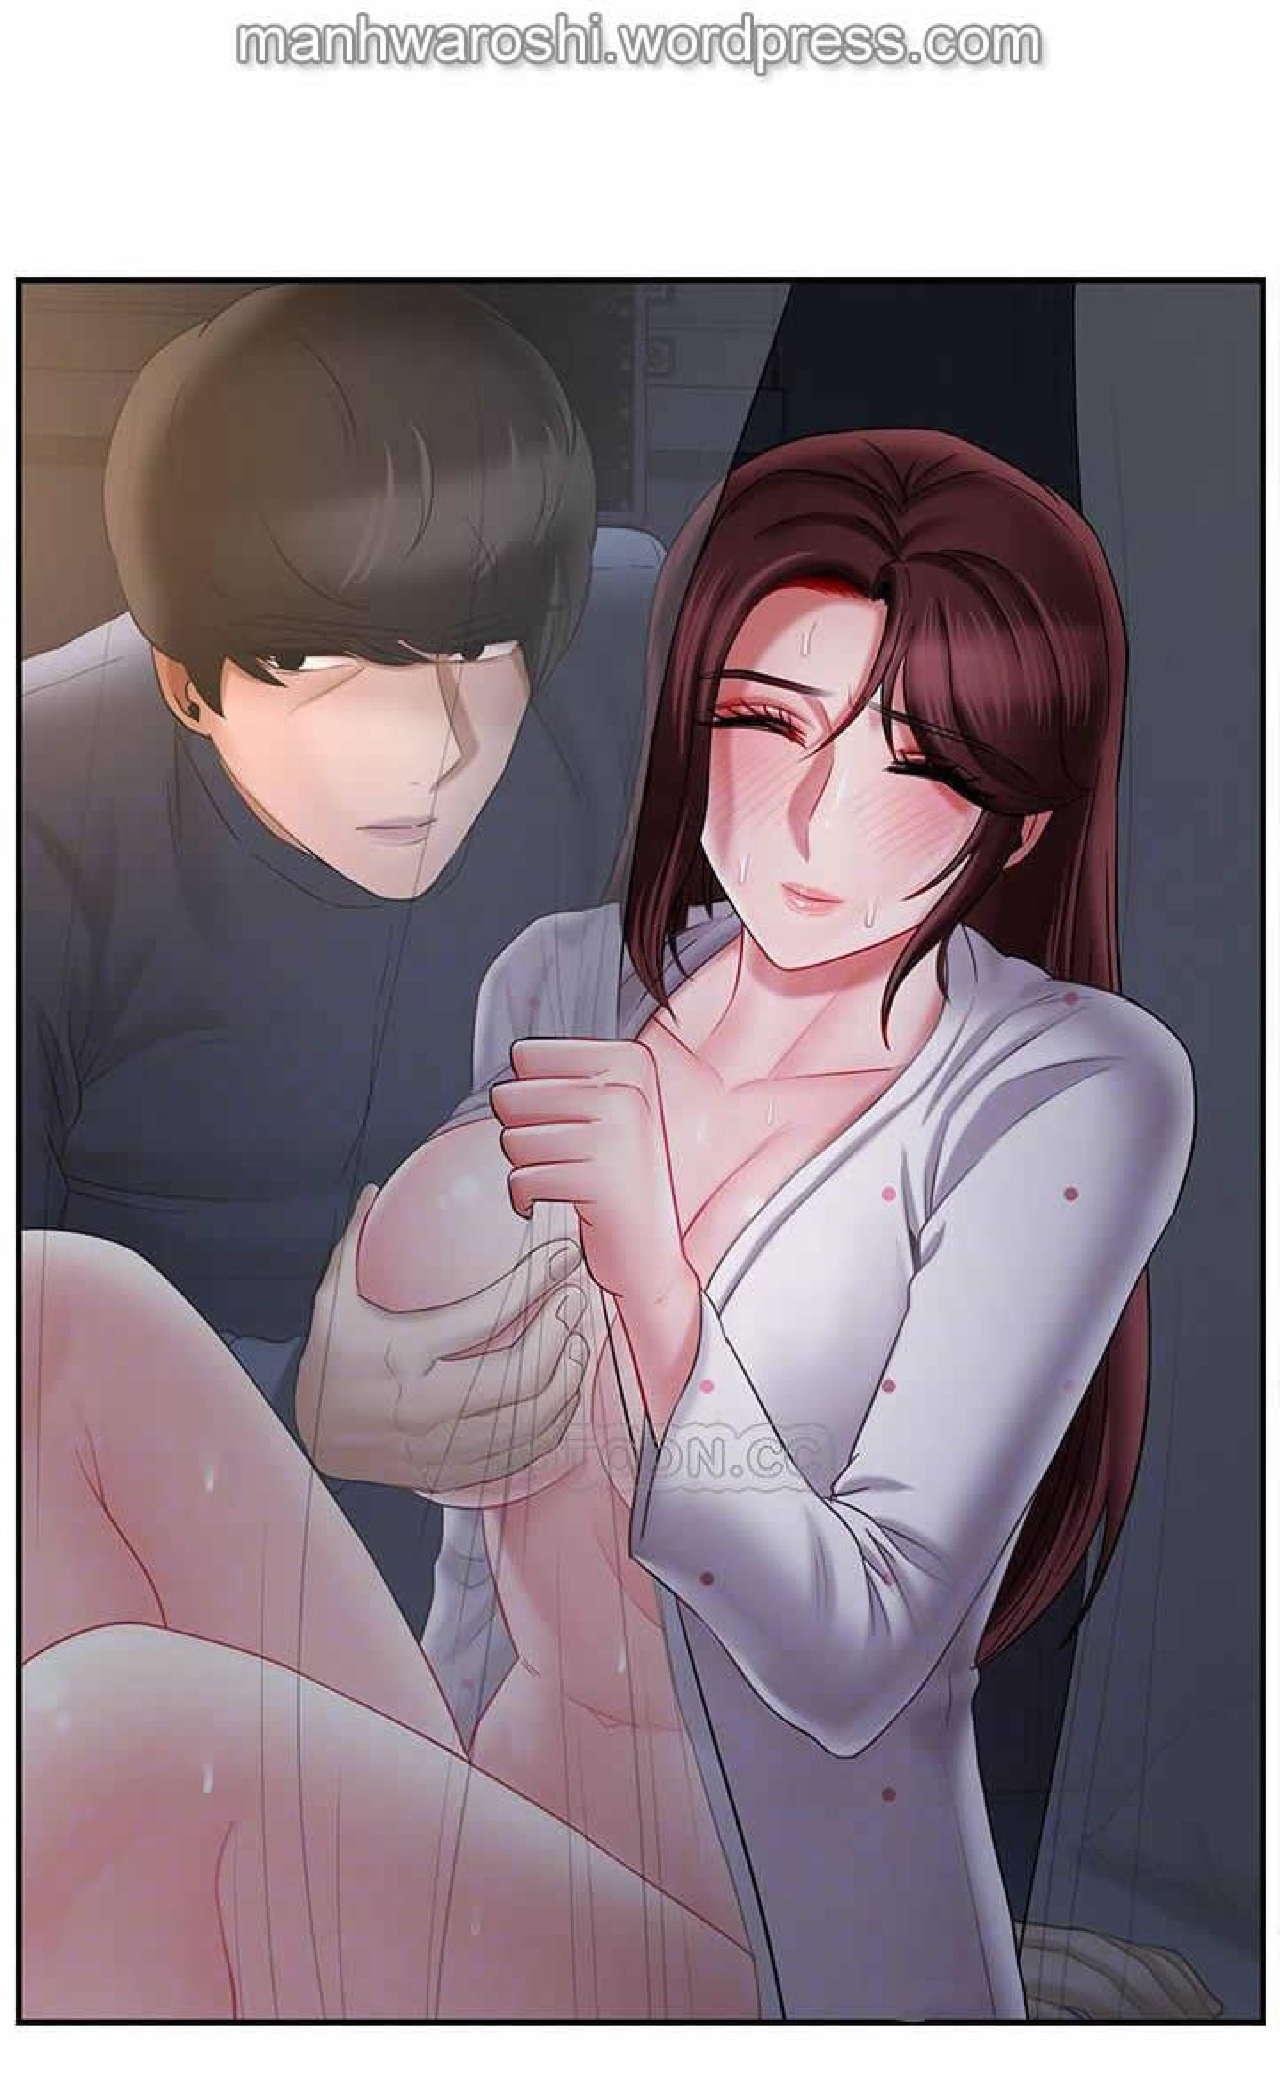 Old Young 坏老师 | PHYSICAL CLASSROOM 14 [Chinese] Manhwa Hugecock - Page 6